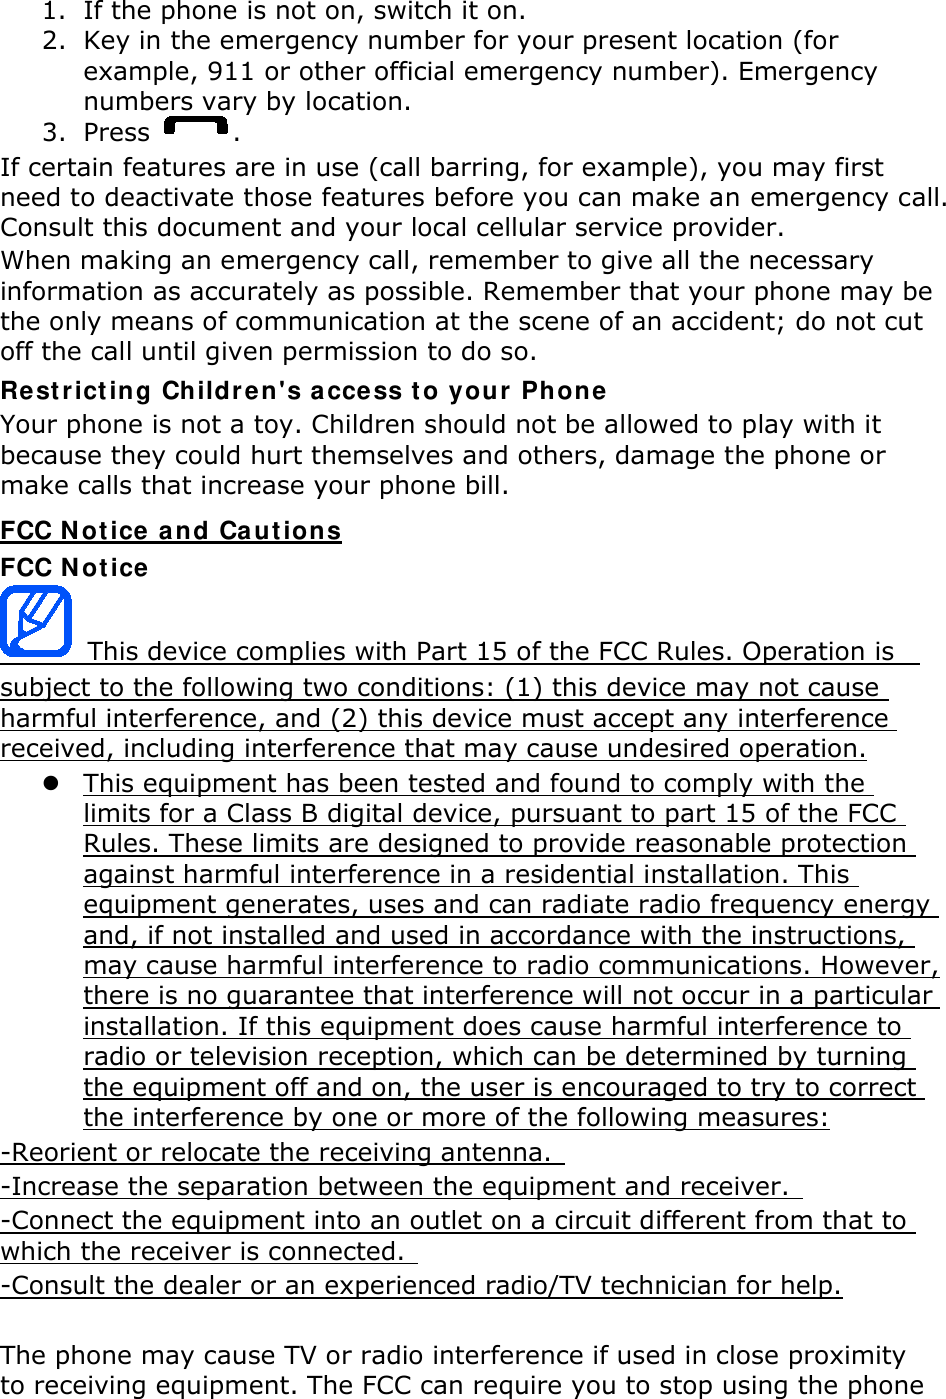 1. If the phone is not on, switch it on. 2. Key in the emergency number for your present location (for example, 911 or other official emergency number). Emergency numbers vary by location. 3. Press  . If certain features are in use (call barring, for example), you may first need to deactivate those features before you can make an emergency call. Consult this document and your local cellular service provider. When making an emergency call, remember to give all the necessary information as accurately as possible. Remember that your phone may be the only means of communication at the scene of an accident; do not cut off the call until given permission to do so. Restricting Children&apos;s access to your Phone Your phone is not a toy. Children should not be allowed to play with it because they could hurt themselves and others, damage the phone or make calls that increase your phone bill. FCC Notice and Cautions FCC Notice  This device complies with Part 15 of the FCC Rules. Operation is   subject to the following two conditions: (1) this device may not cause harmful interference, and (2) this device must accept any interference received, including interference that may cause undesired operation.  This equipment has been tested and found to comply with the limits for a Class B digital device, pursuant to part 15 of the FCC Rules. These limits are designed to provide reasonable protection against harmful interference in a residential installation. This equipment generates, uses and can radiate radio frequency energy and, if not installed and used in accordance with the instructions, may cause harmful interference to radio communications. However, there is no guarantee that interference will not occur in a particular installation. If this equipment does cause harmful interference to radio or television reception, which can be determined by turning the equipment off and on, the user is encouraged to try to correct the interference by one or more of the following measures: -Reorient or relocate the receiving antenna.   -Increase the separation between the equipment and receiver.   -Connect the equipment into an outlet on a circuit different from that to which the receiver is connected.   -Consult the dealer or an experienced radio/TV technician for help.  The phone may cause TV or radio interference if used in close proximity to receiving equipment. The FCC can require you to stop using the phone 